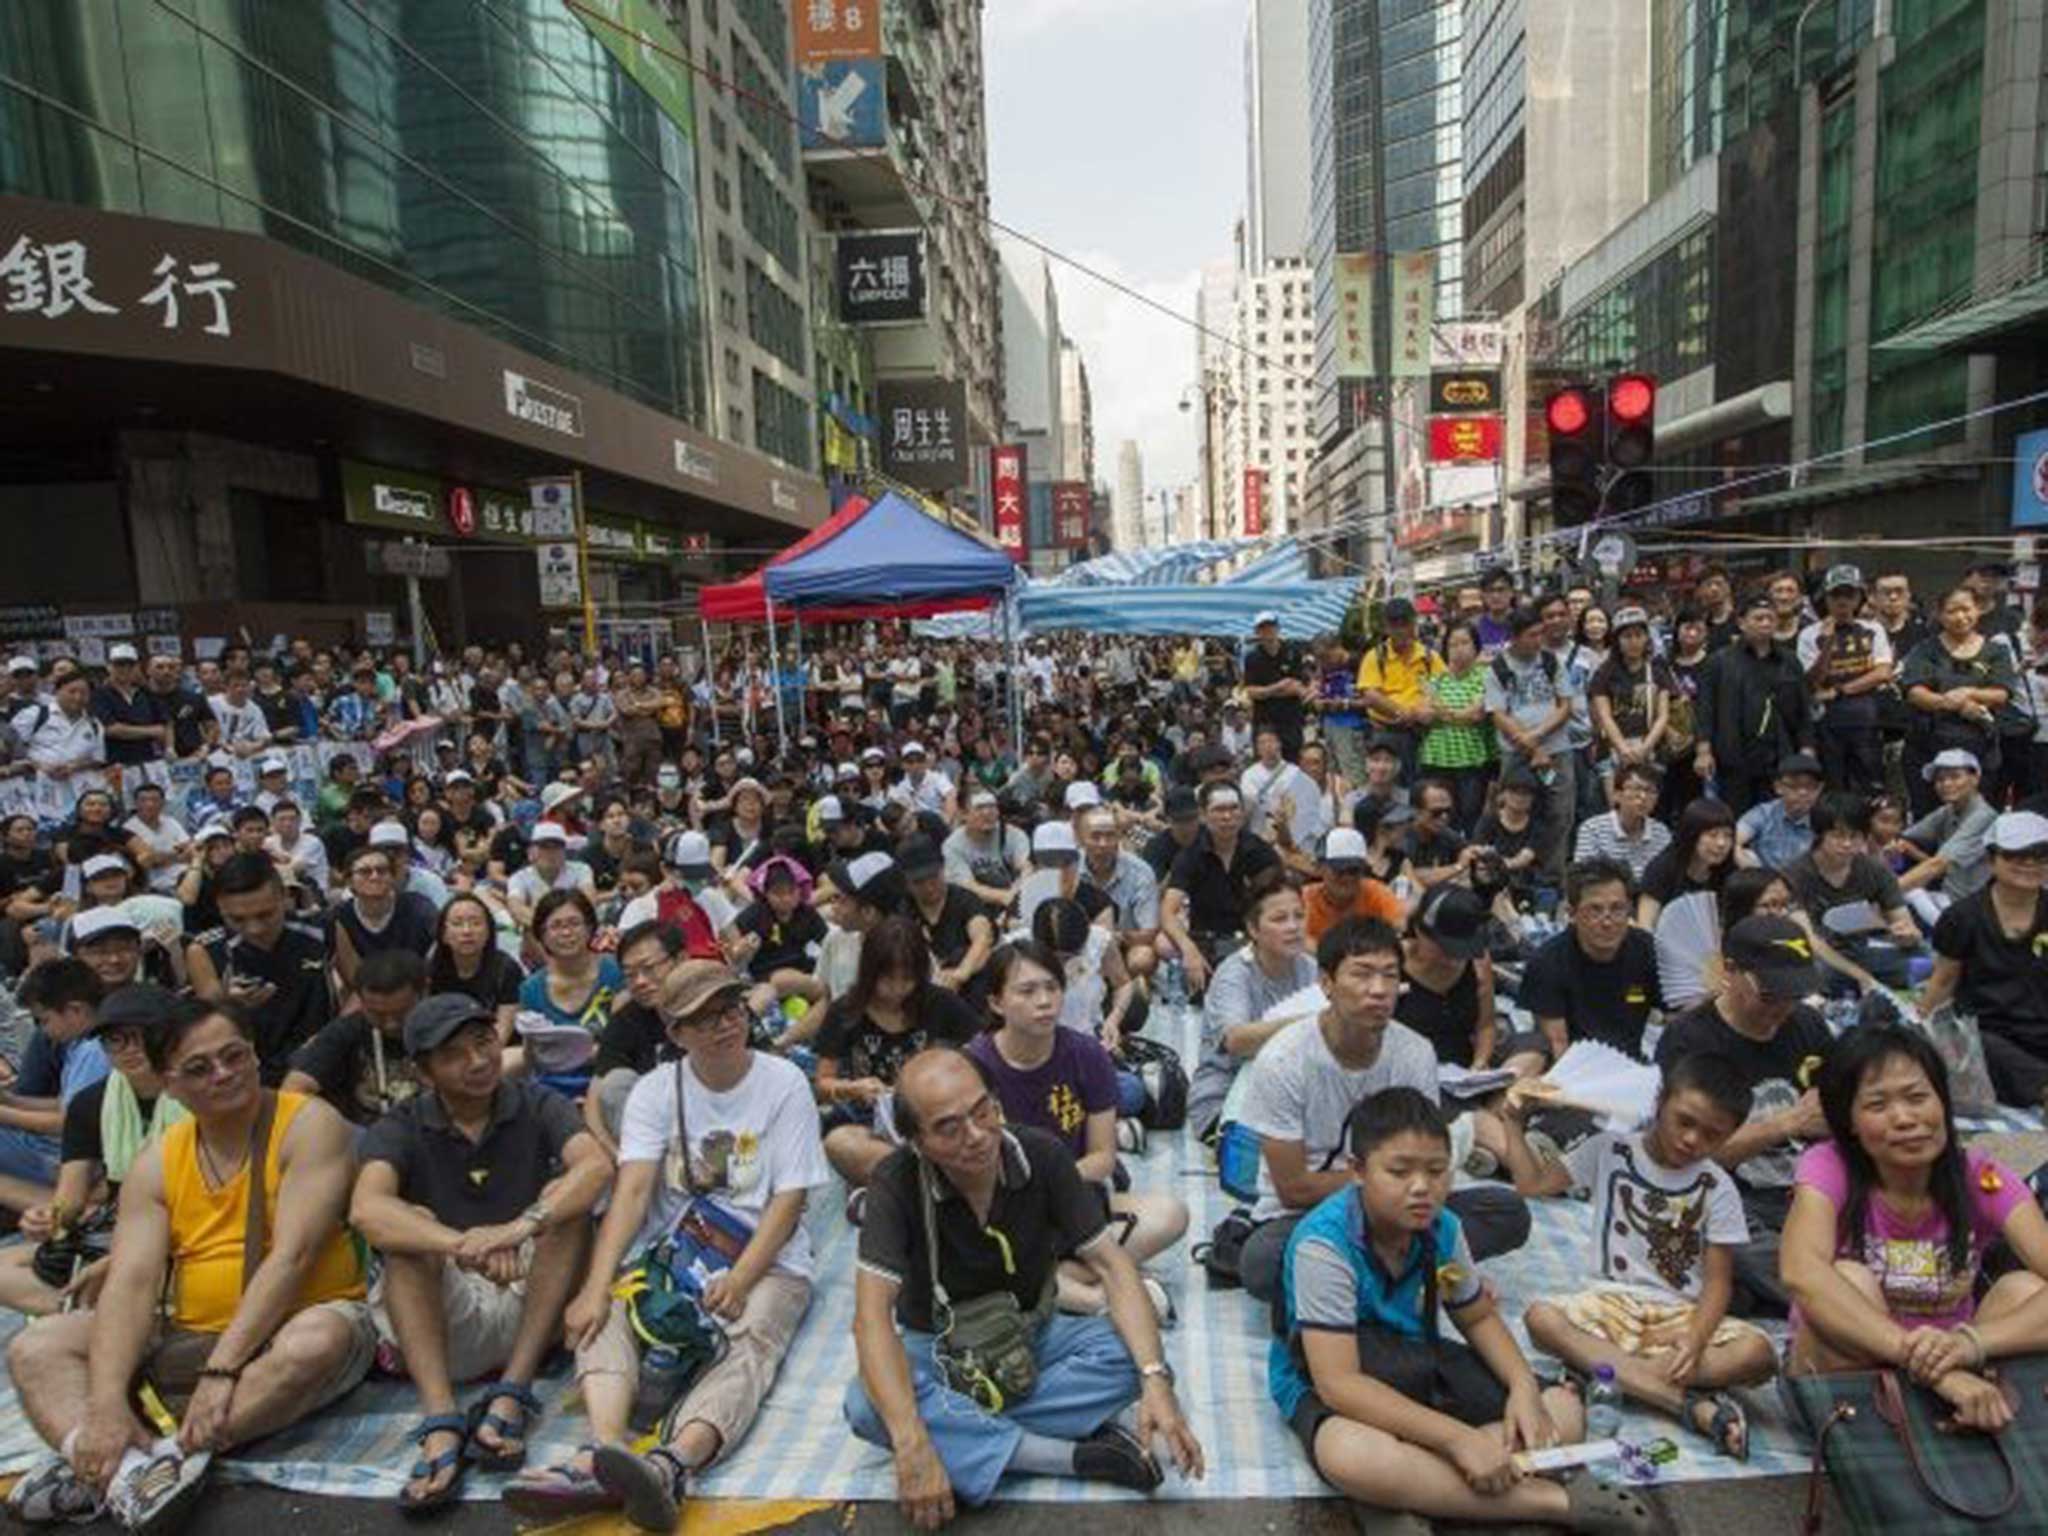 Hong Kong's chief executive has issued stark warning to protesters